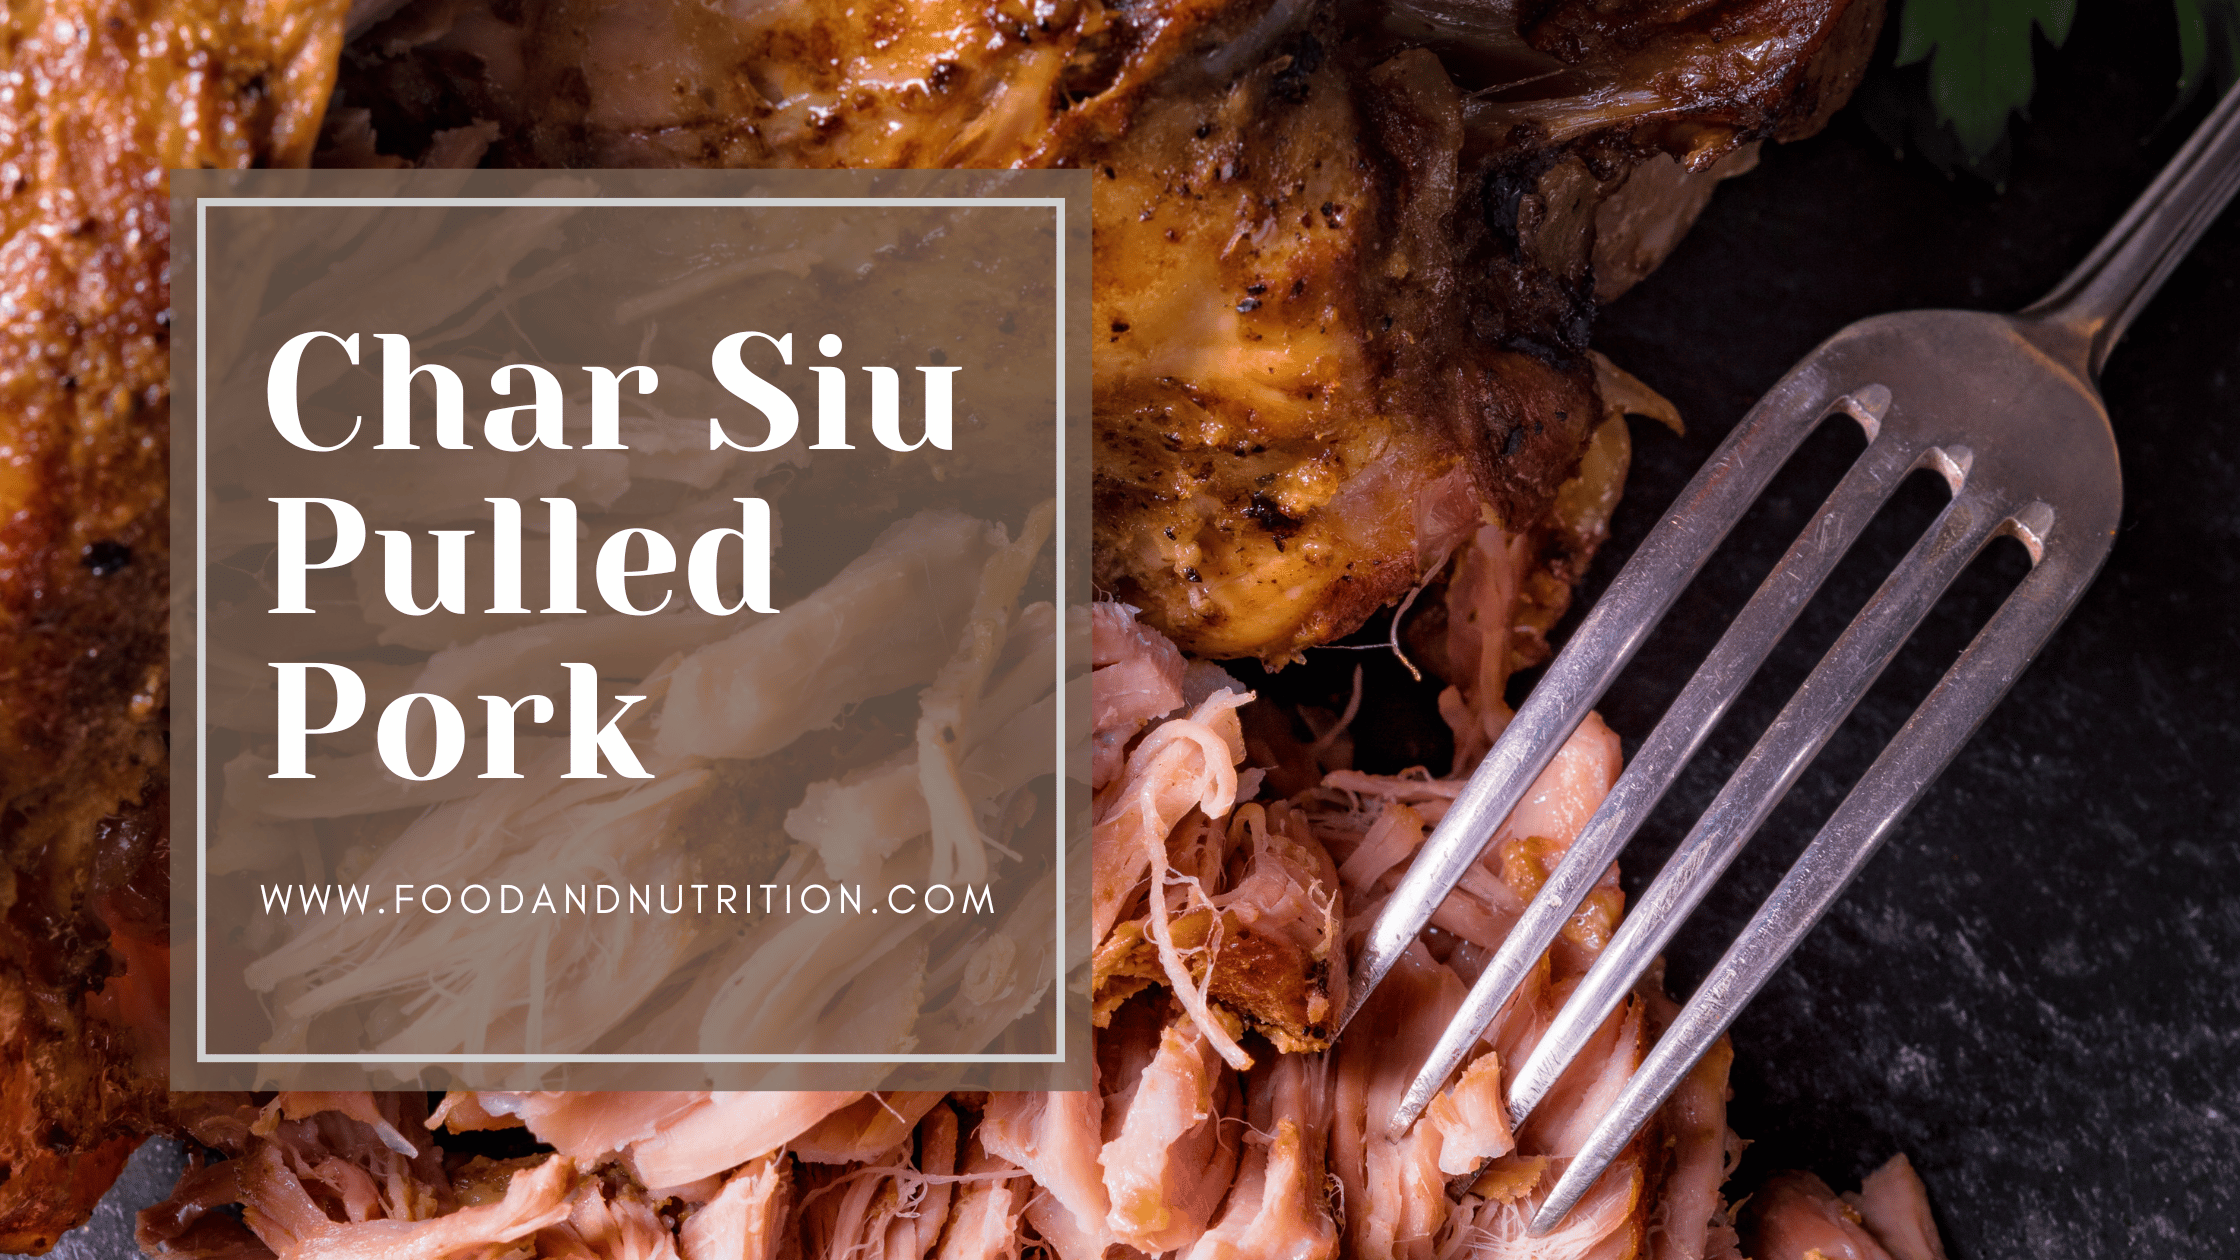 From Cantonese Cuisine to American Tables: The Story of Char Siu Pork